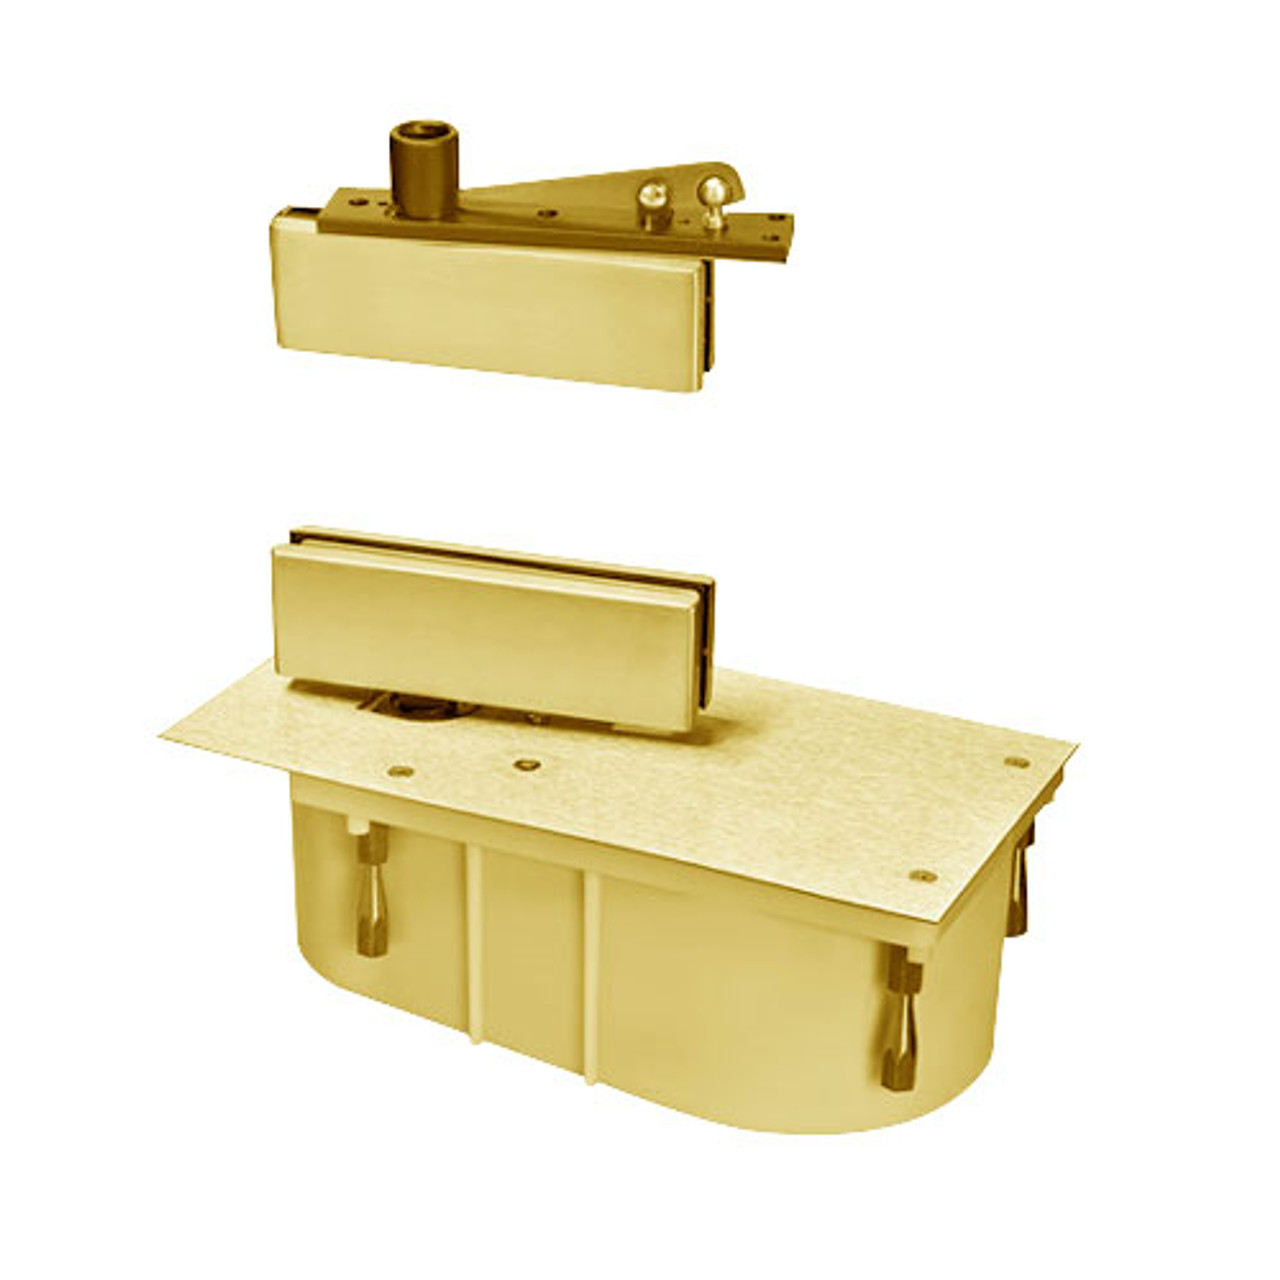 428-95S-LTP-LH-605 Rixson 428 Series Heavy Duty Single Acting Center Hung Floor Closer with Patch Fittings in Bright Brass Finish